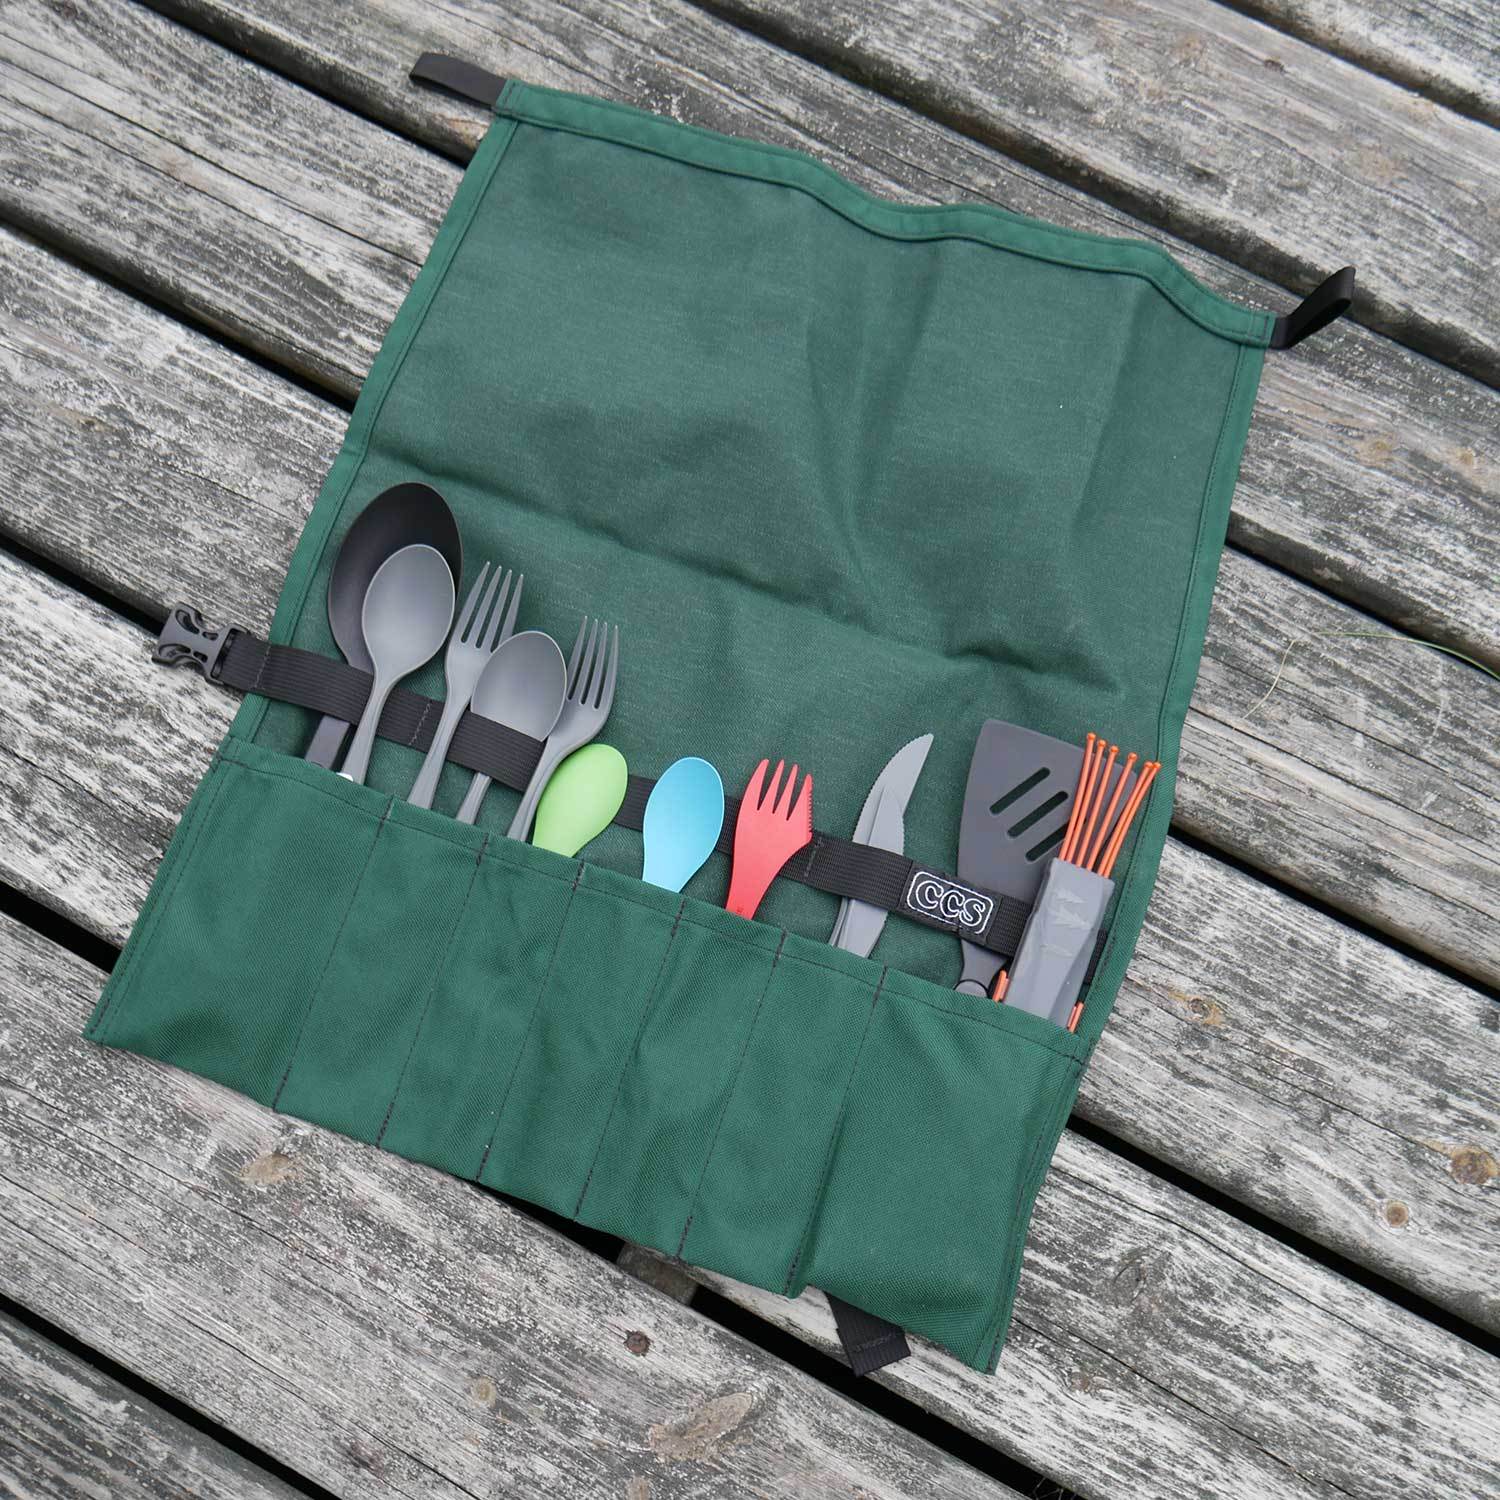 Utensil Roll Up By Ccs, Camp Kitchen Organizer | Boundary Waters Catalog